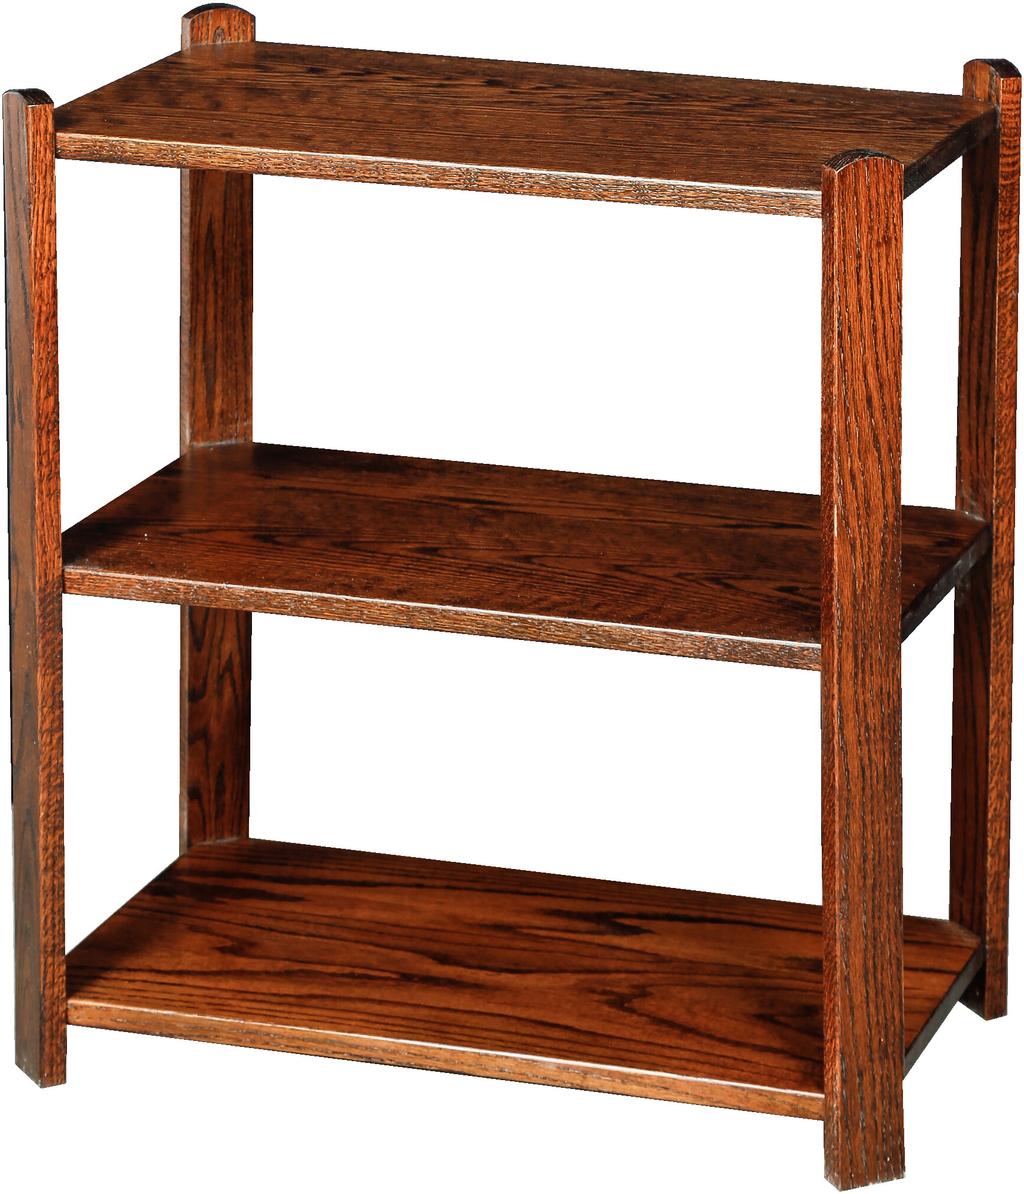 Shown with Golden Brown stain 3 Tier Stand Large: